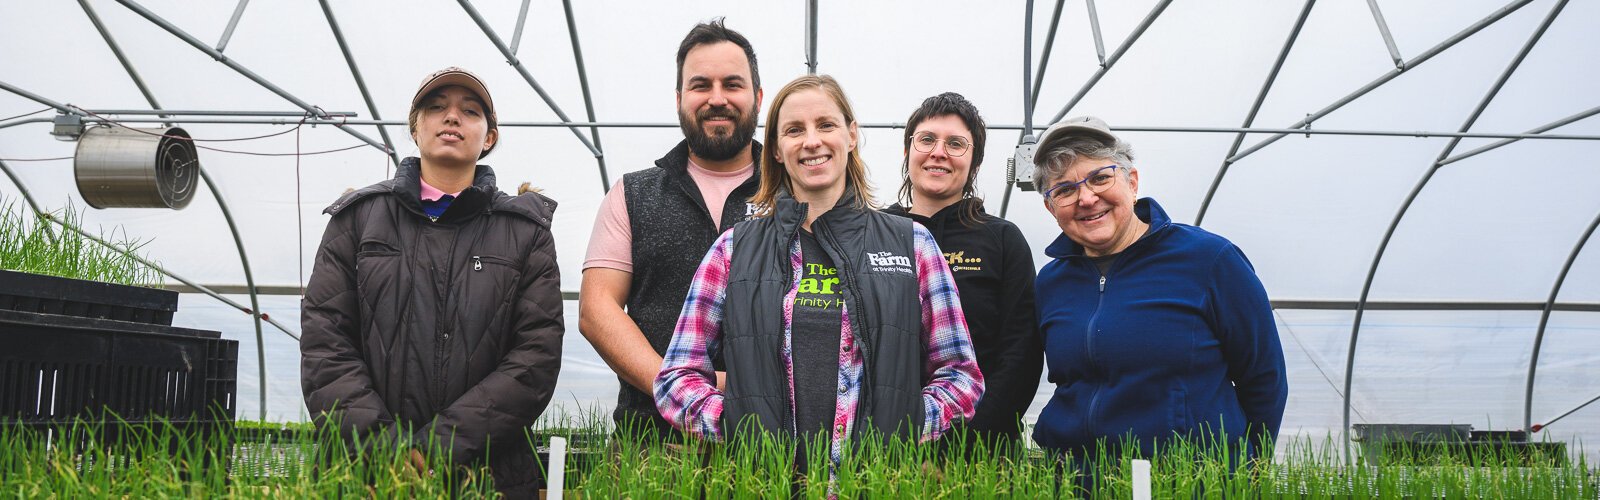 The staff at The Farm at Trinity Health, from left to right: Rose Oliverio, Will Jaquinde, Jae Gerhart, Cat Jardin, and Kay Wilson.